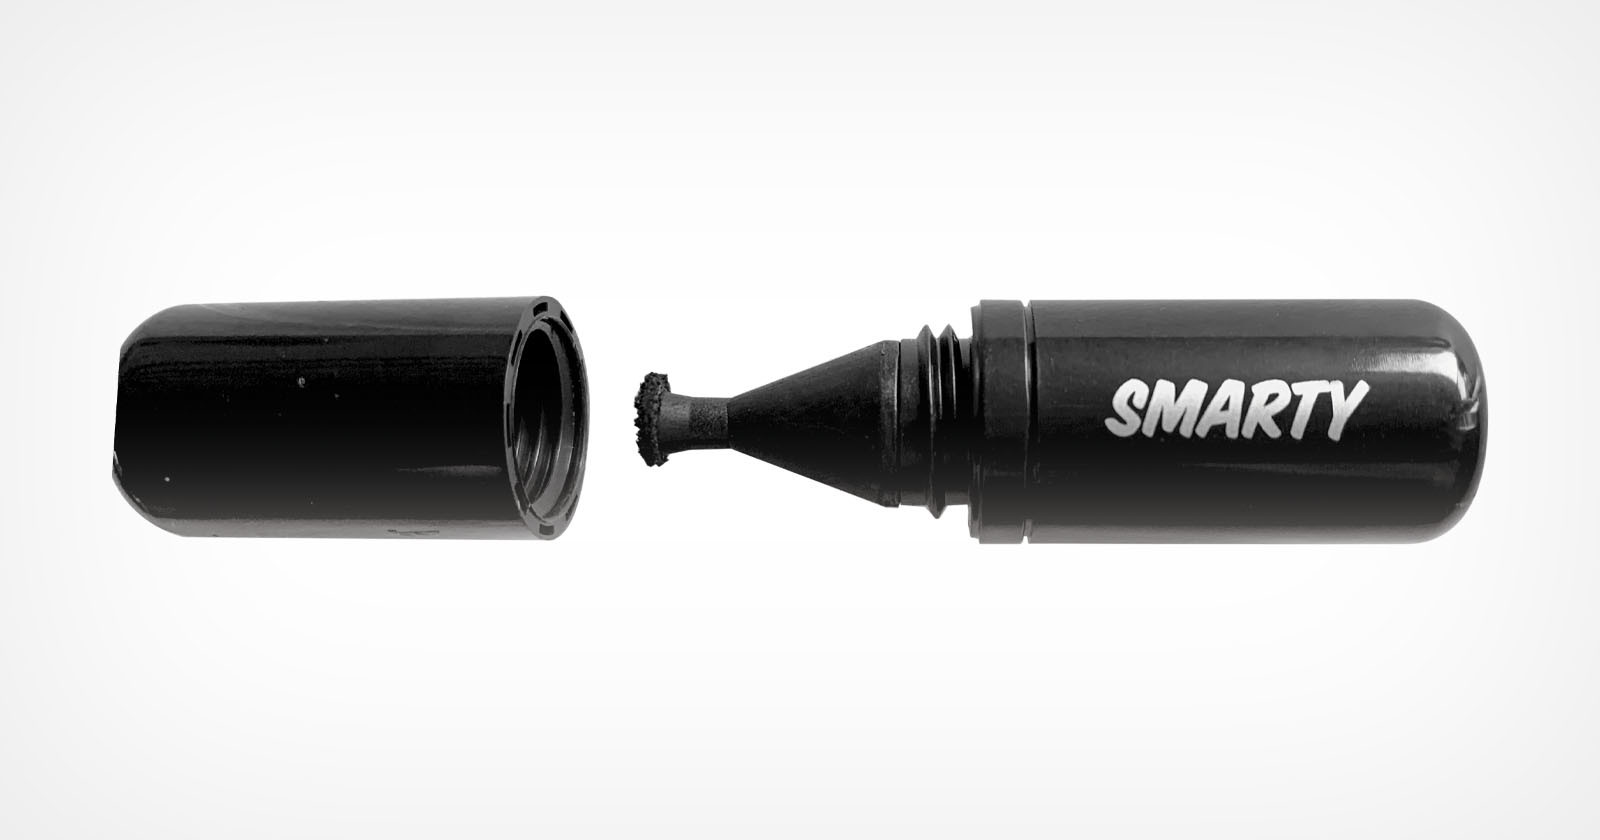 The LensPen Smarty is a Lens Cleaning Tool for Smartphones